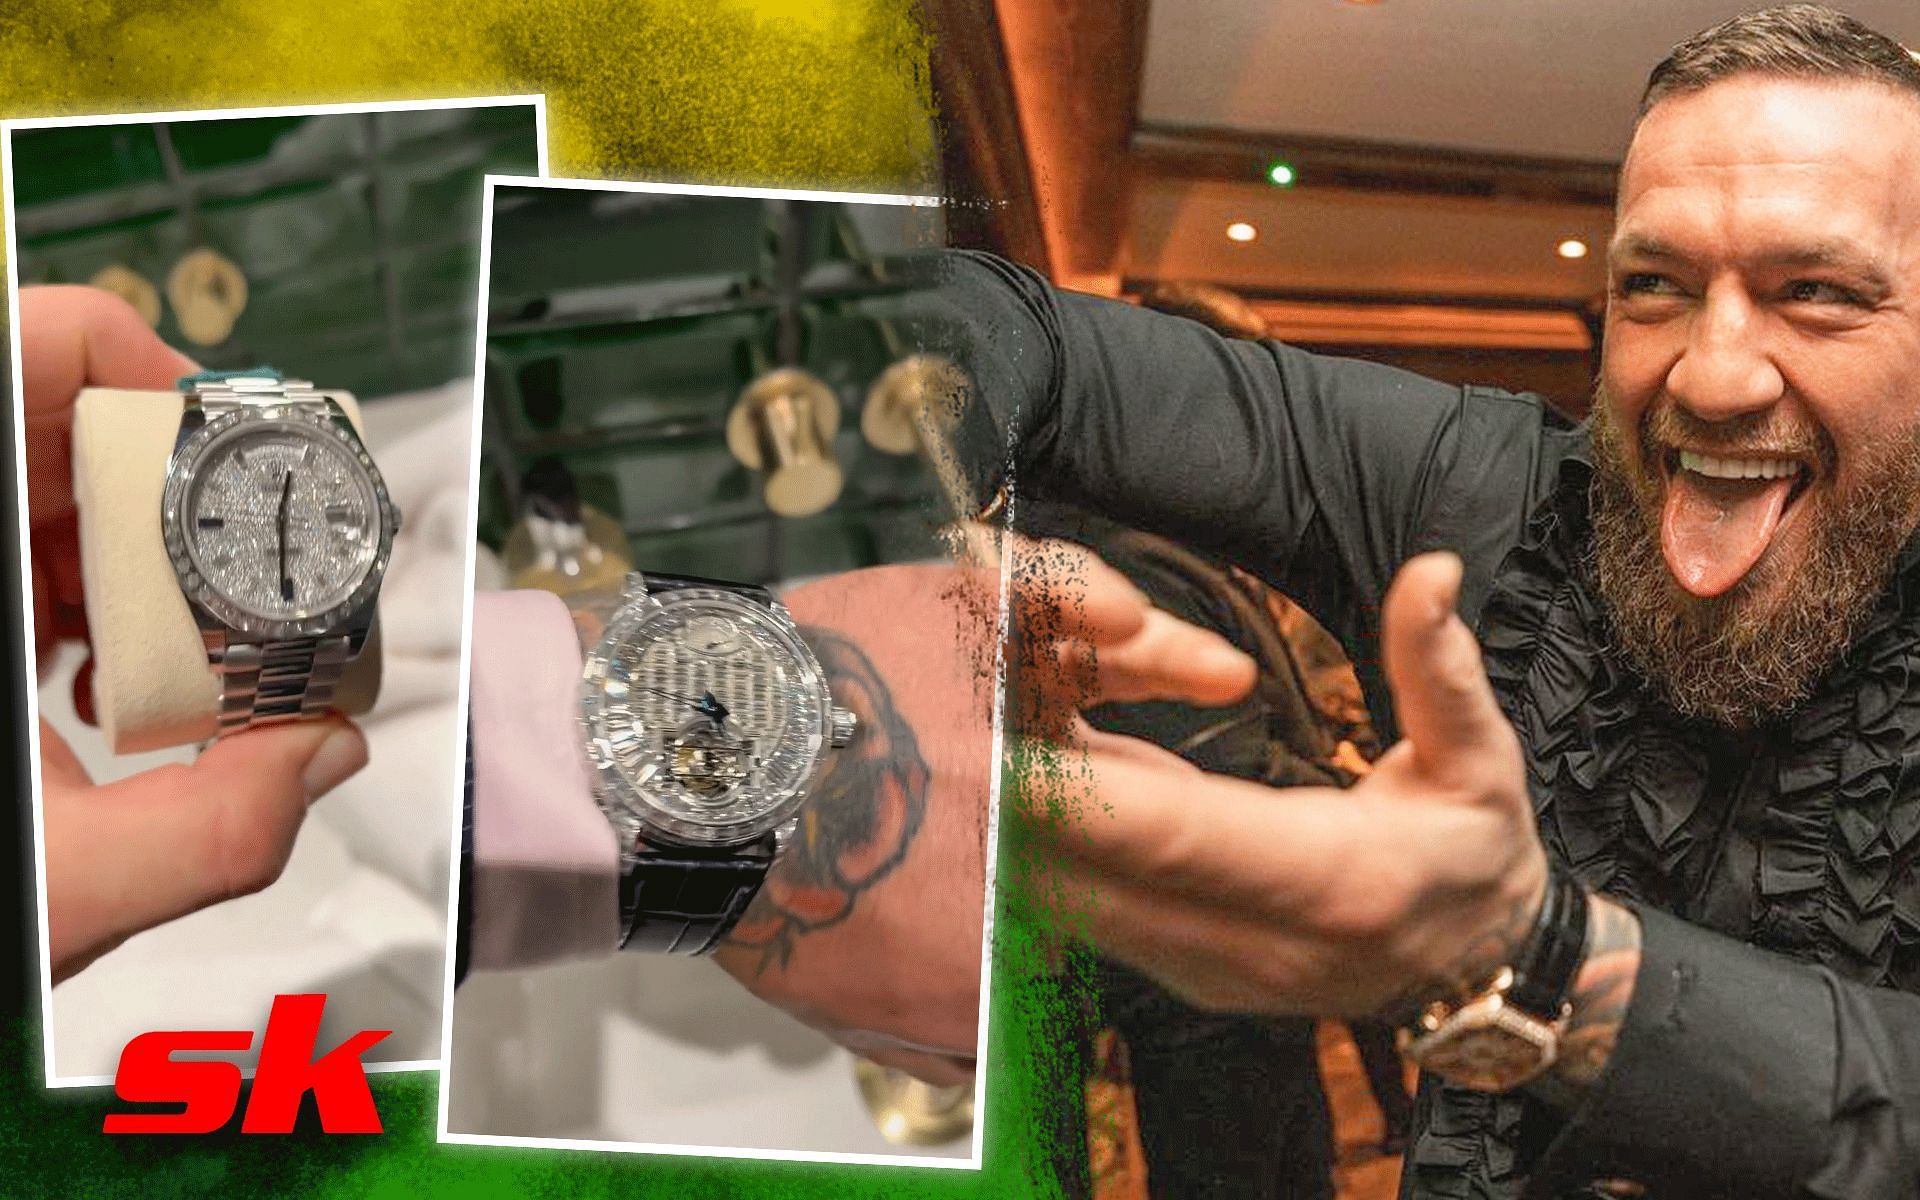 Conor McGregor shows off his luxury watches [Photo credit: @thenotoriousmma on Instagram]